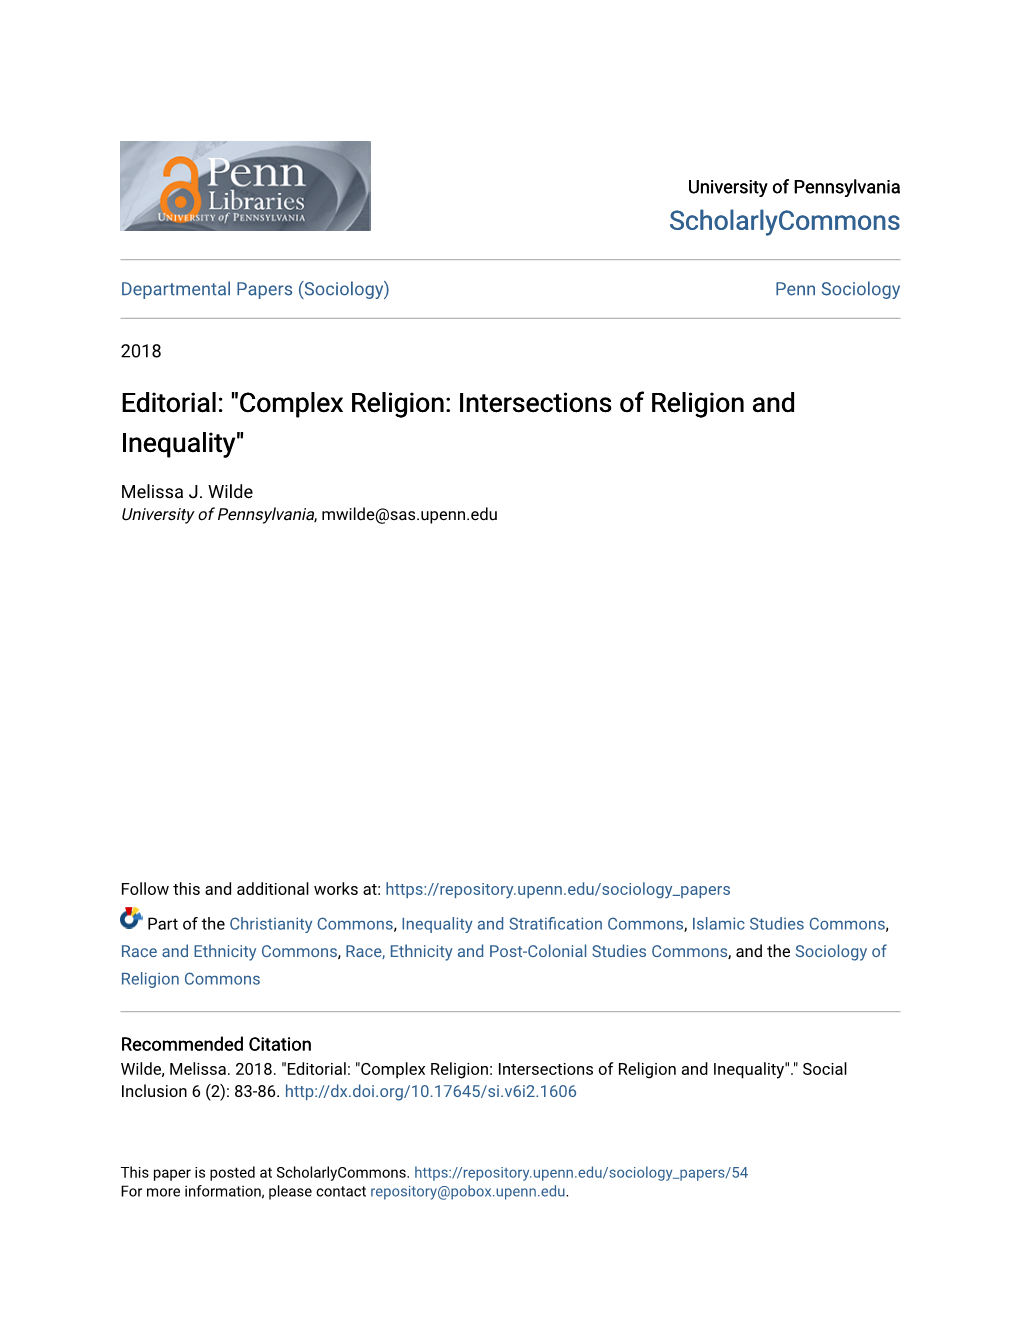 Complex Religion: Intersections of Religion and Inequality"